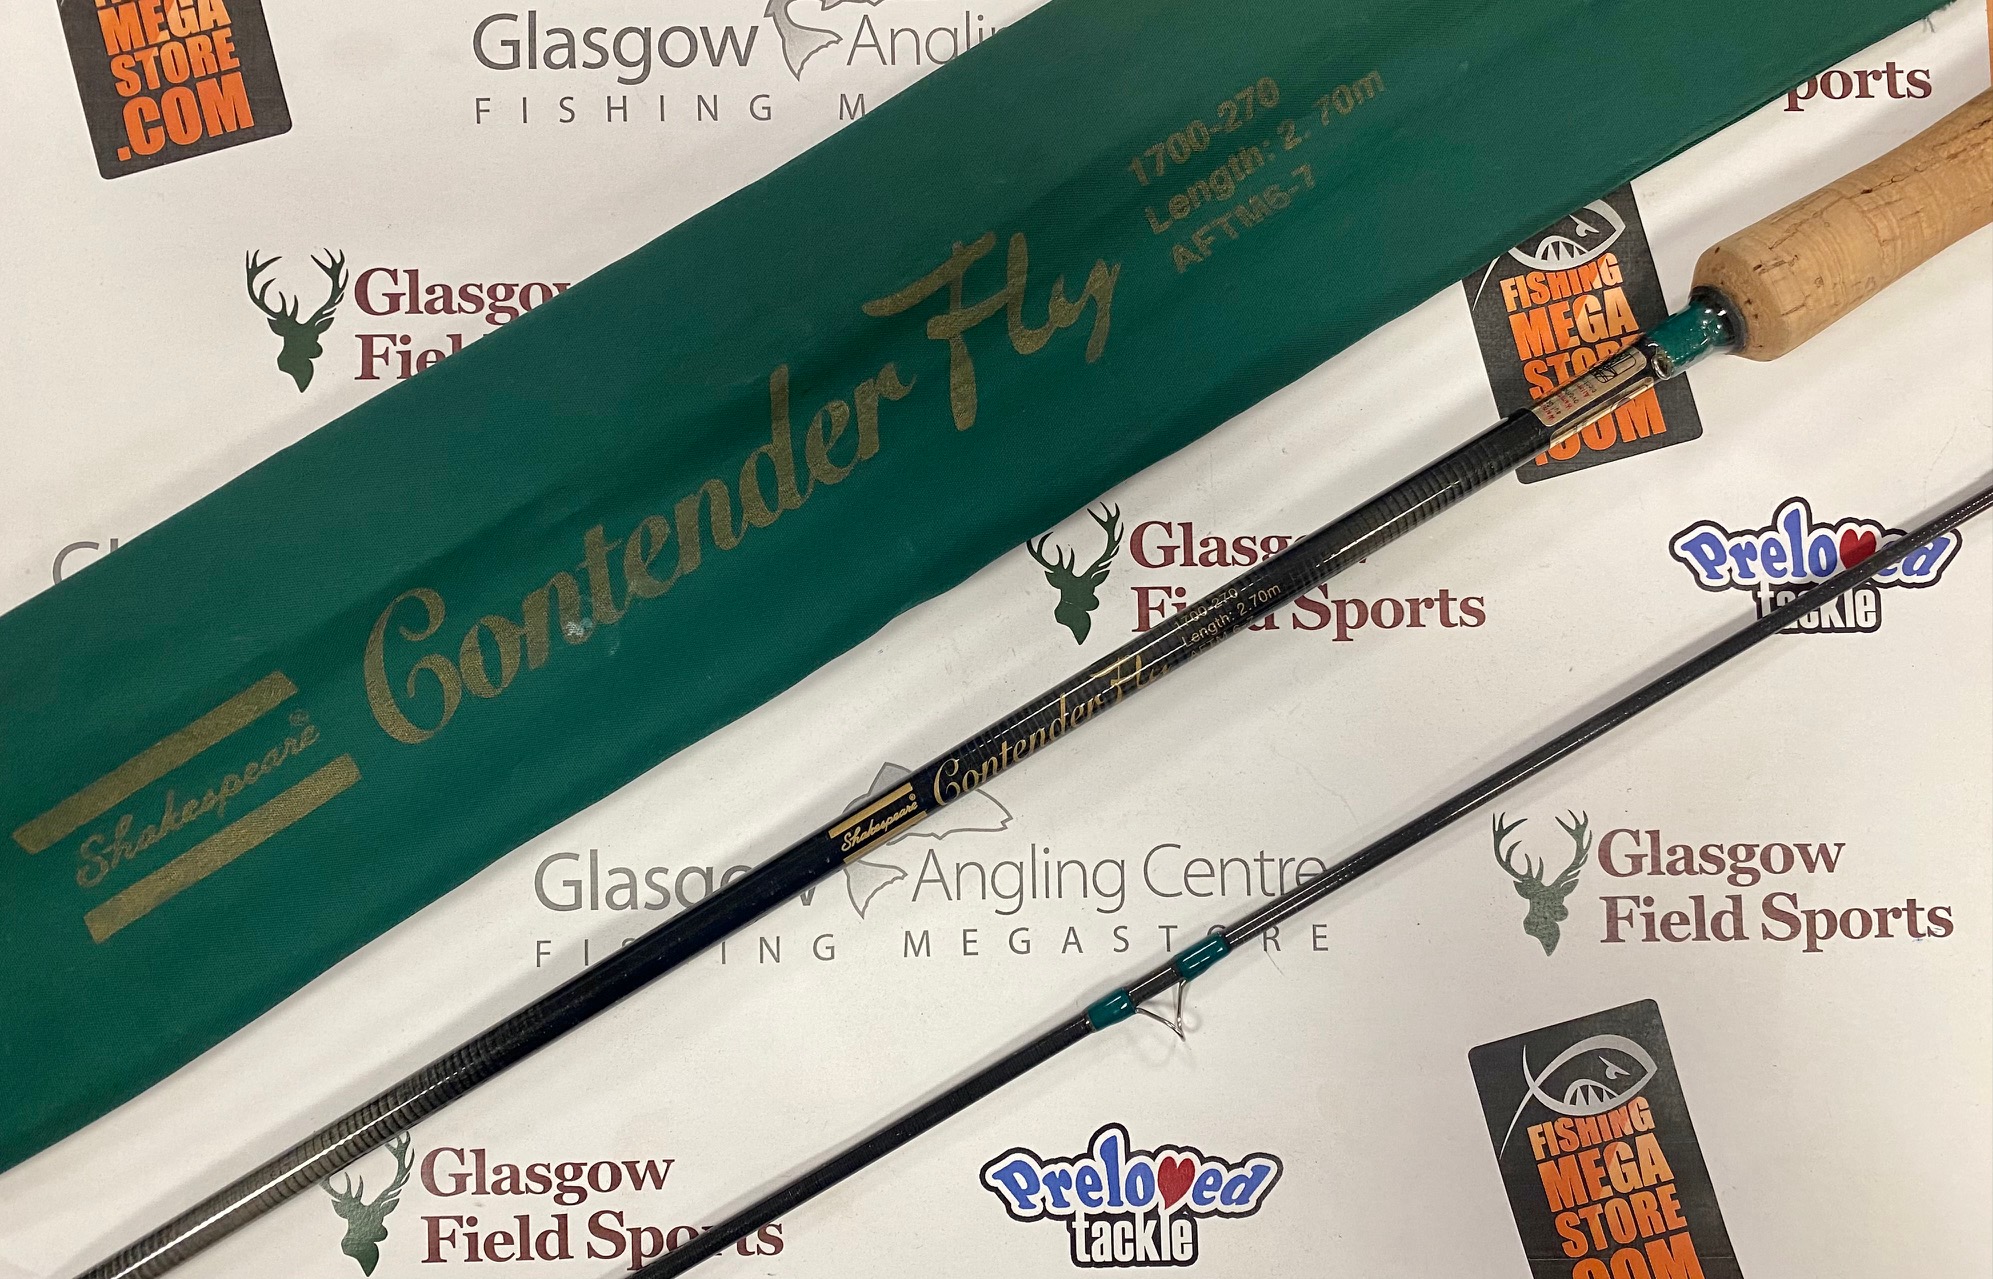 Contender 9ft #6/7 2 piece trout fly rod (in bag) - Used